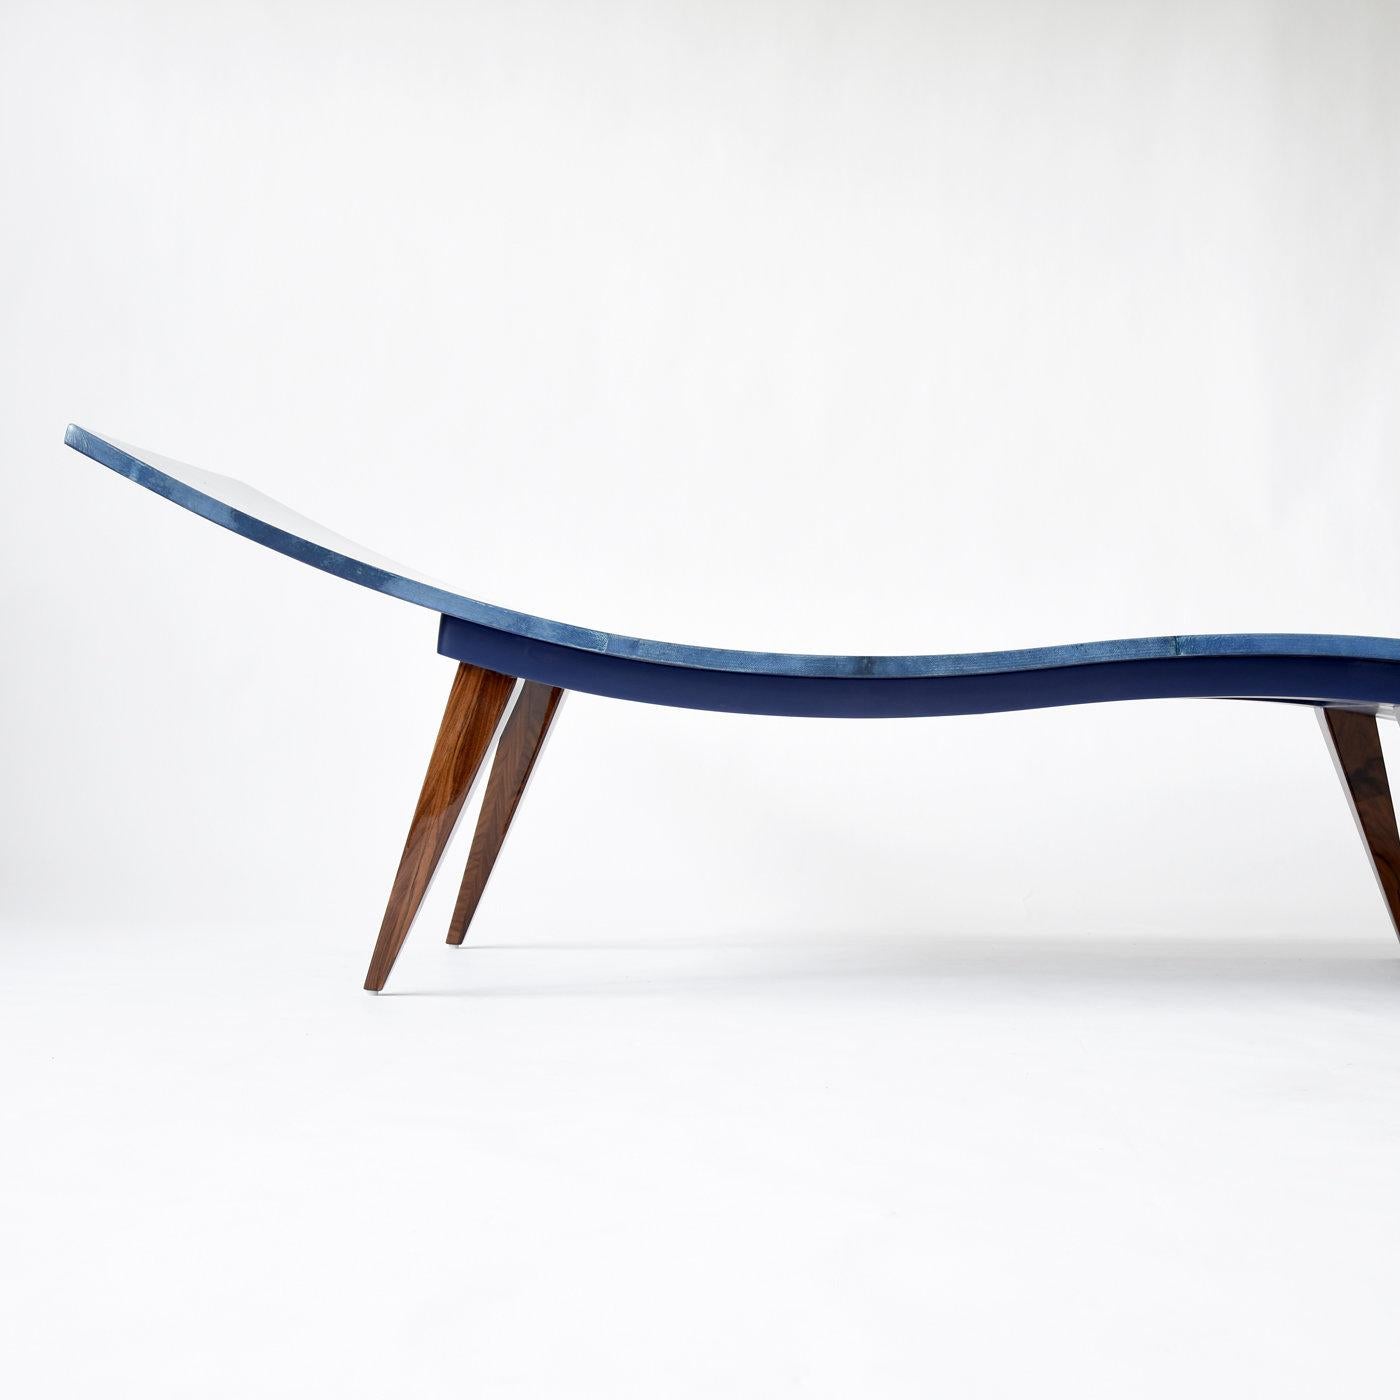 Chaise Longue in curved wood covered with matt blue parchment (goatskin) in a unique effect. The rosewood legs have a gloss finish, creating an elegant, modern and sophisticated contrast. Suitable for relaxation in the home or office, or as an